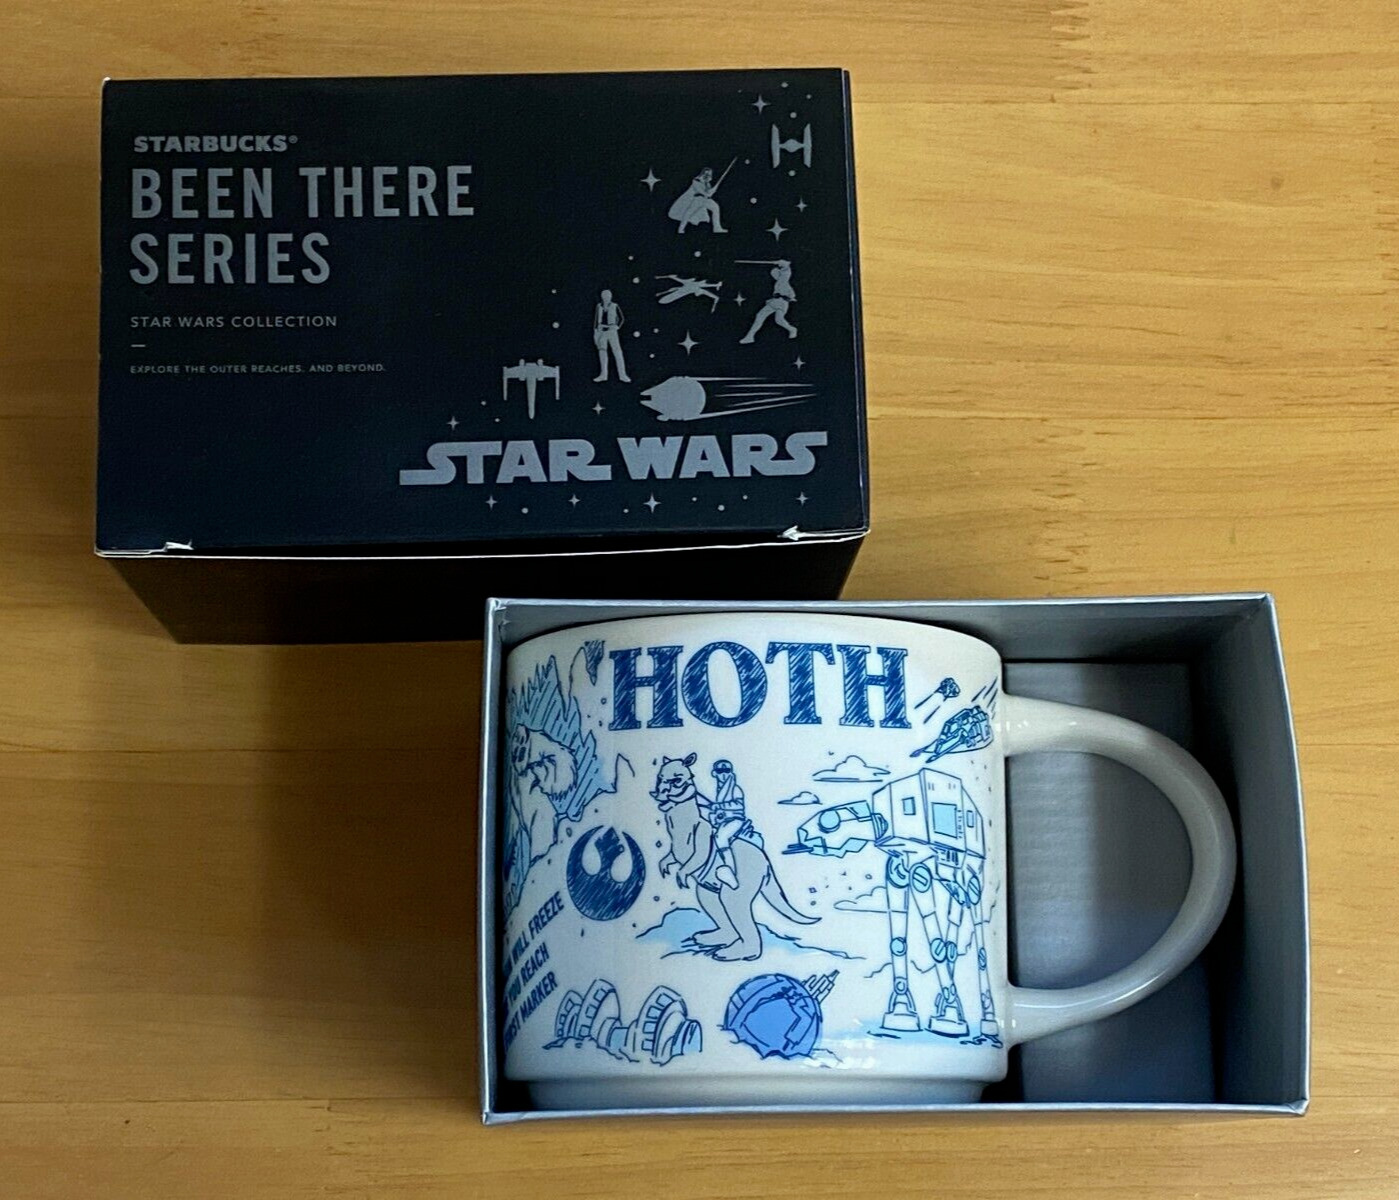 2020 Starbucks Been There Series Star Wars Mug: Hoth - NEW IN BOX